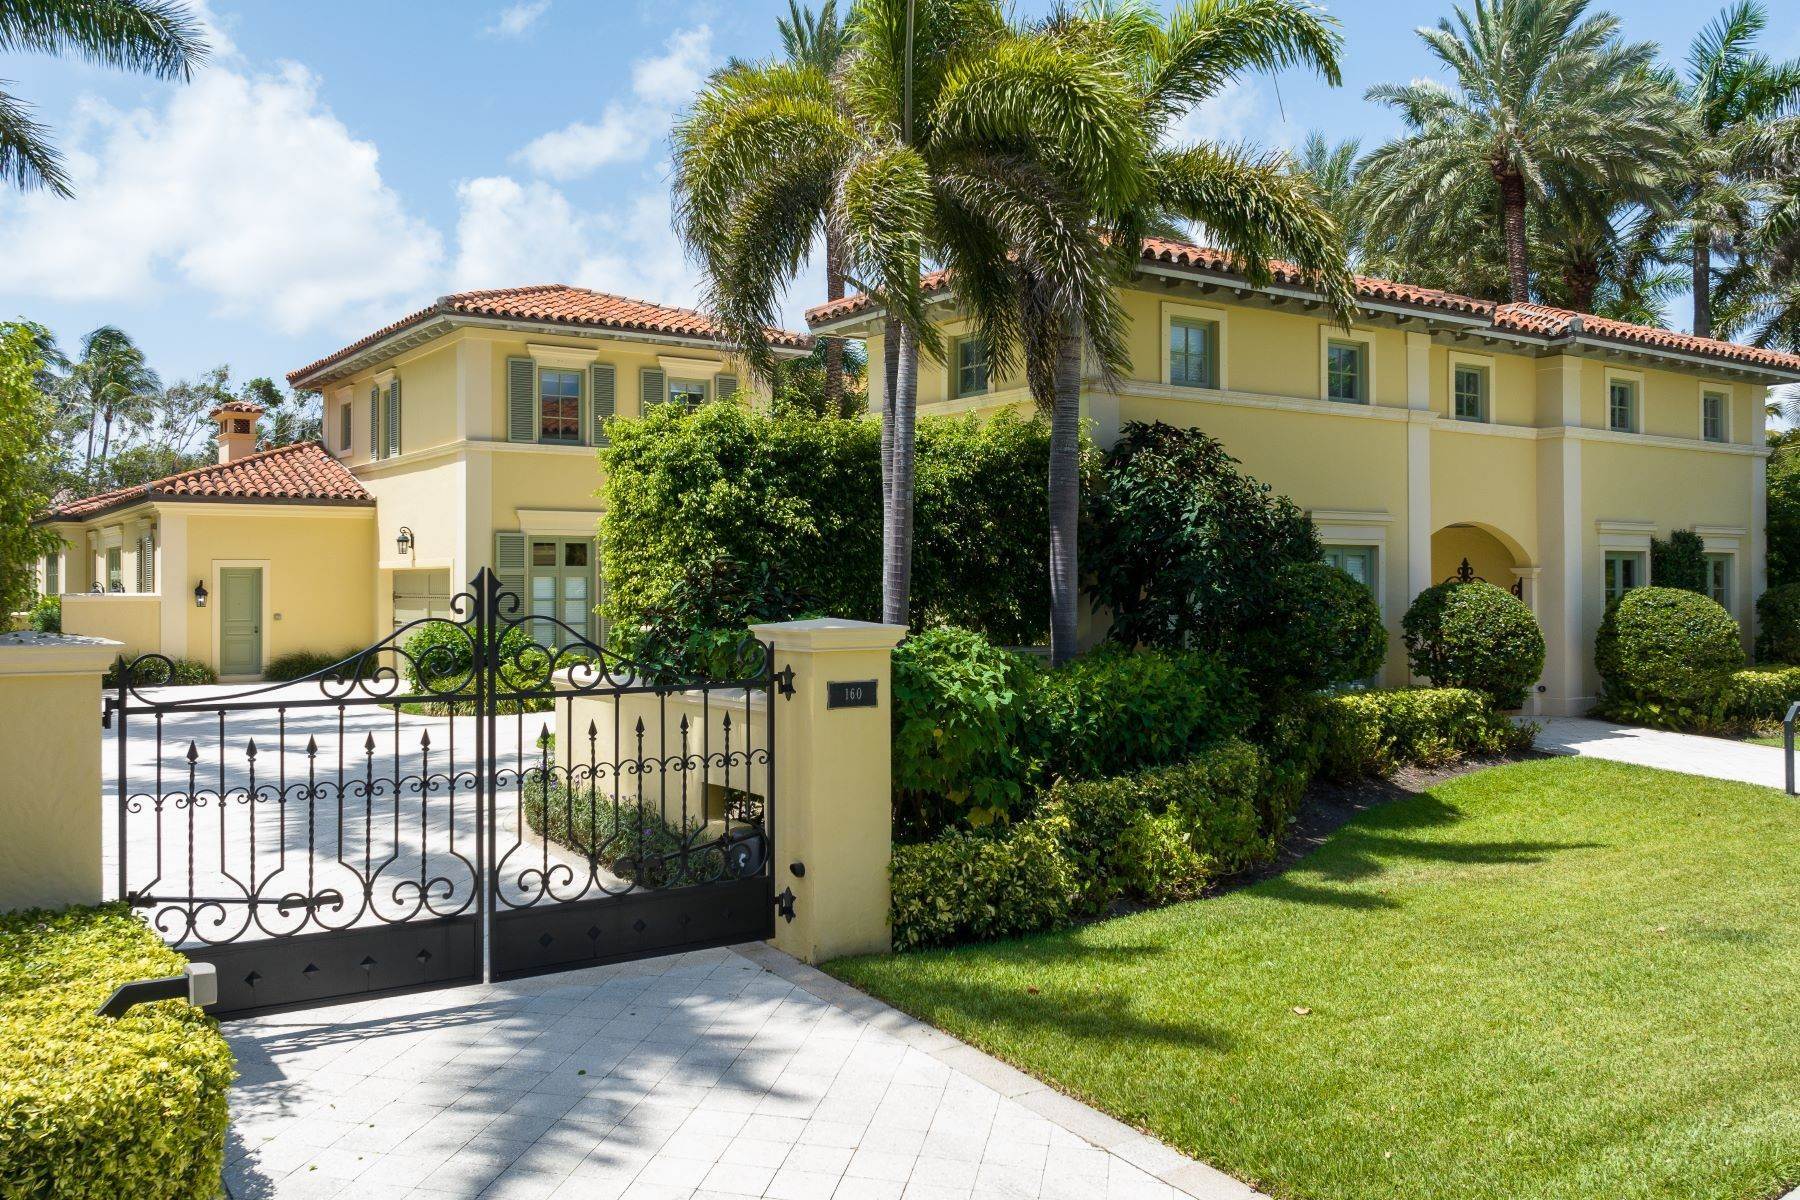 Single Family Homes for Sale at 1.5 Acre Palm Beach Estate 160 Clarendon Avenue Palm Beach, Florida 33480 United States